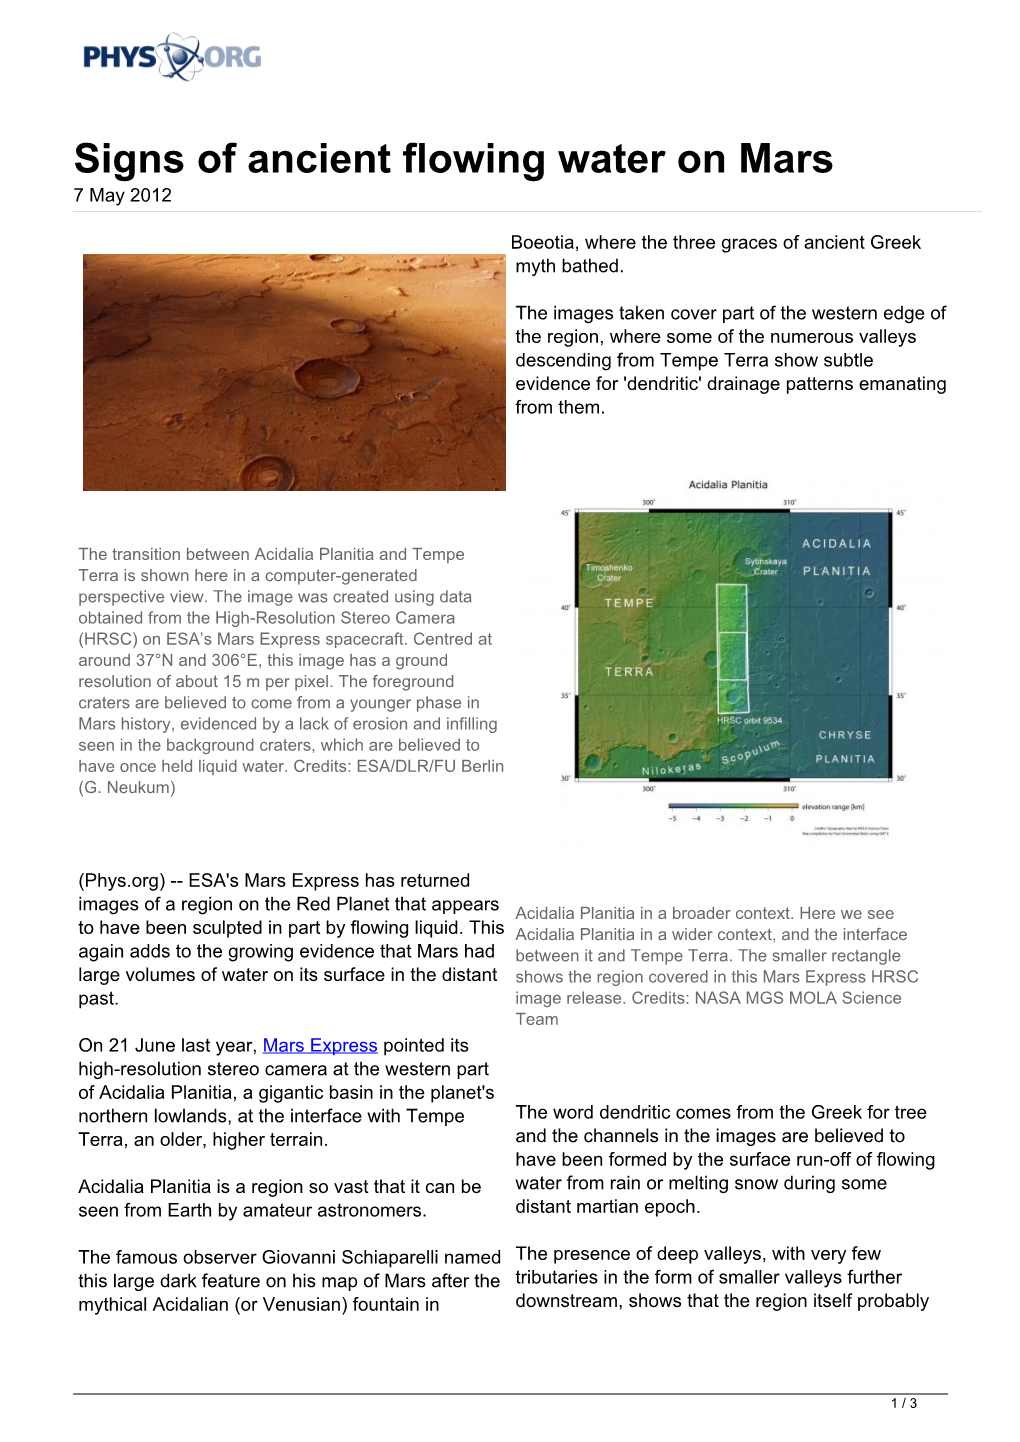 Signs of Ancient Flowing Water on Mars 7 May 2012